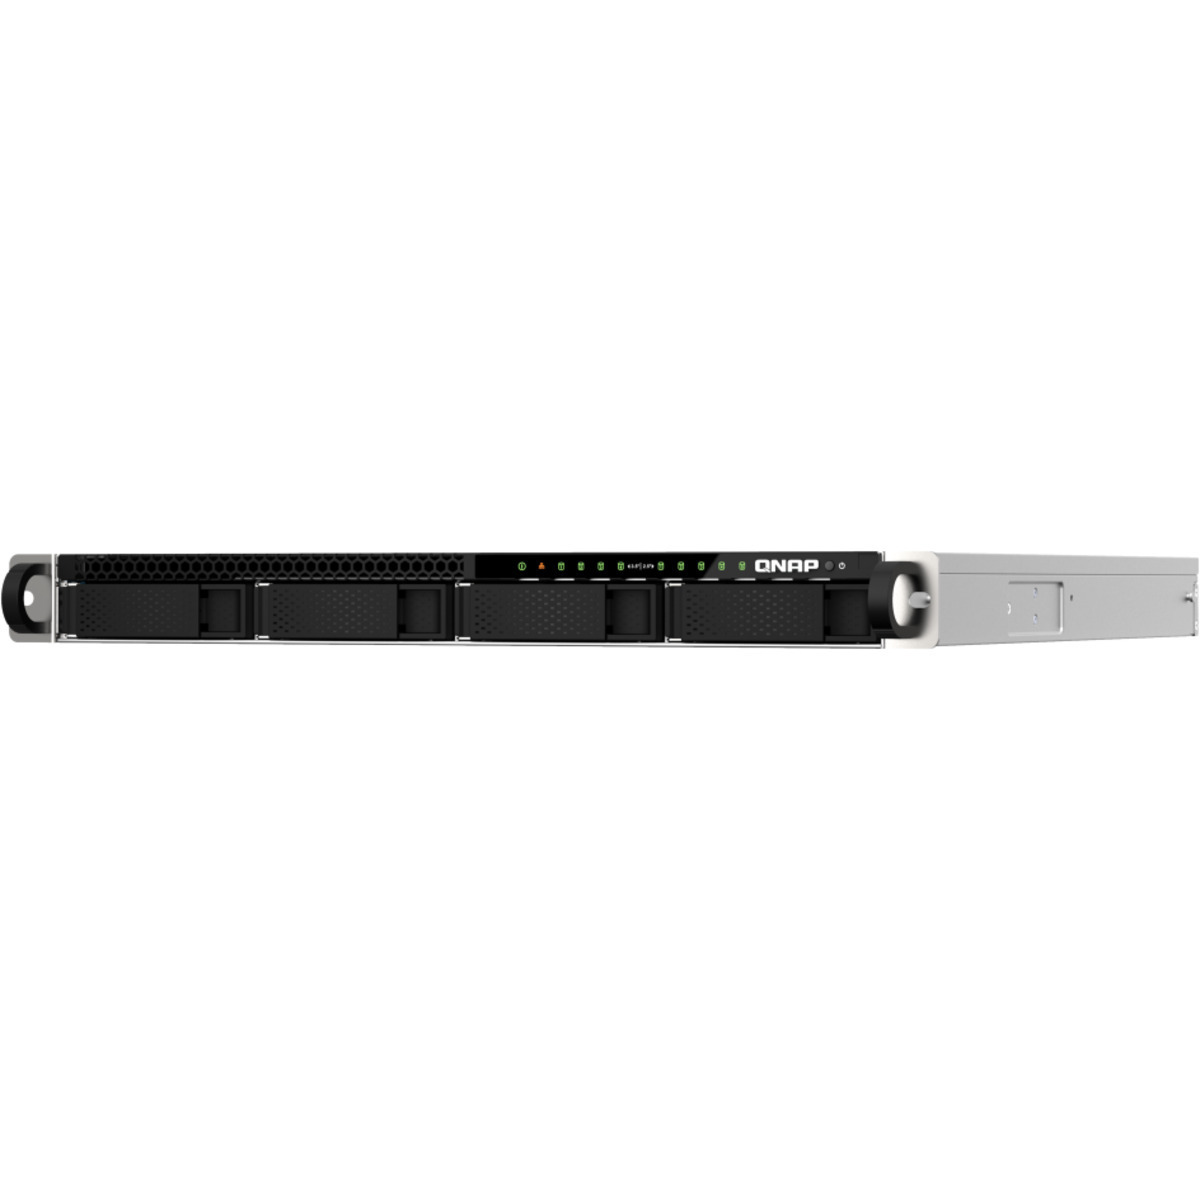 buy QNAP TS-h987XU-RP QuTS hero Edition 64tb RackMount NAS - Network Attached Storage Device 4x16000gb Seagate EXOS X18 ST16000NM000J 3.5 7200rpm SATA 6Gb/s HDD ENTERPRISE Class Drives Installed - Burn-In Tested - nas headquarters buy network attached storage server device das new raid-5 free shipping usa spring sale TS-h987XU-RP QuTS hero Edition